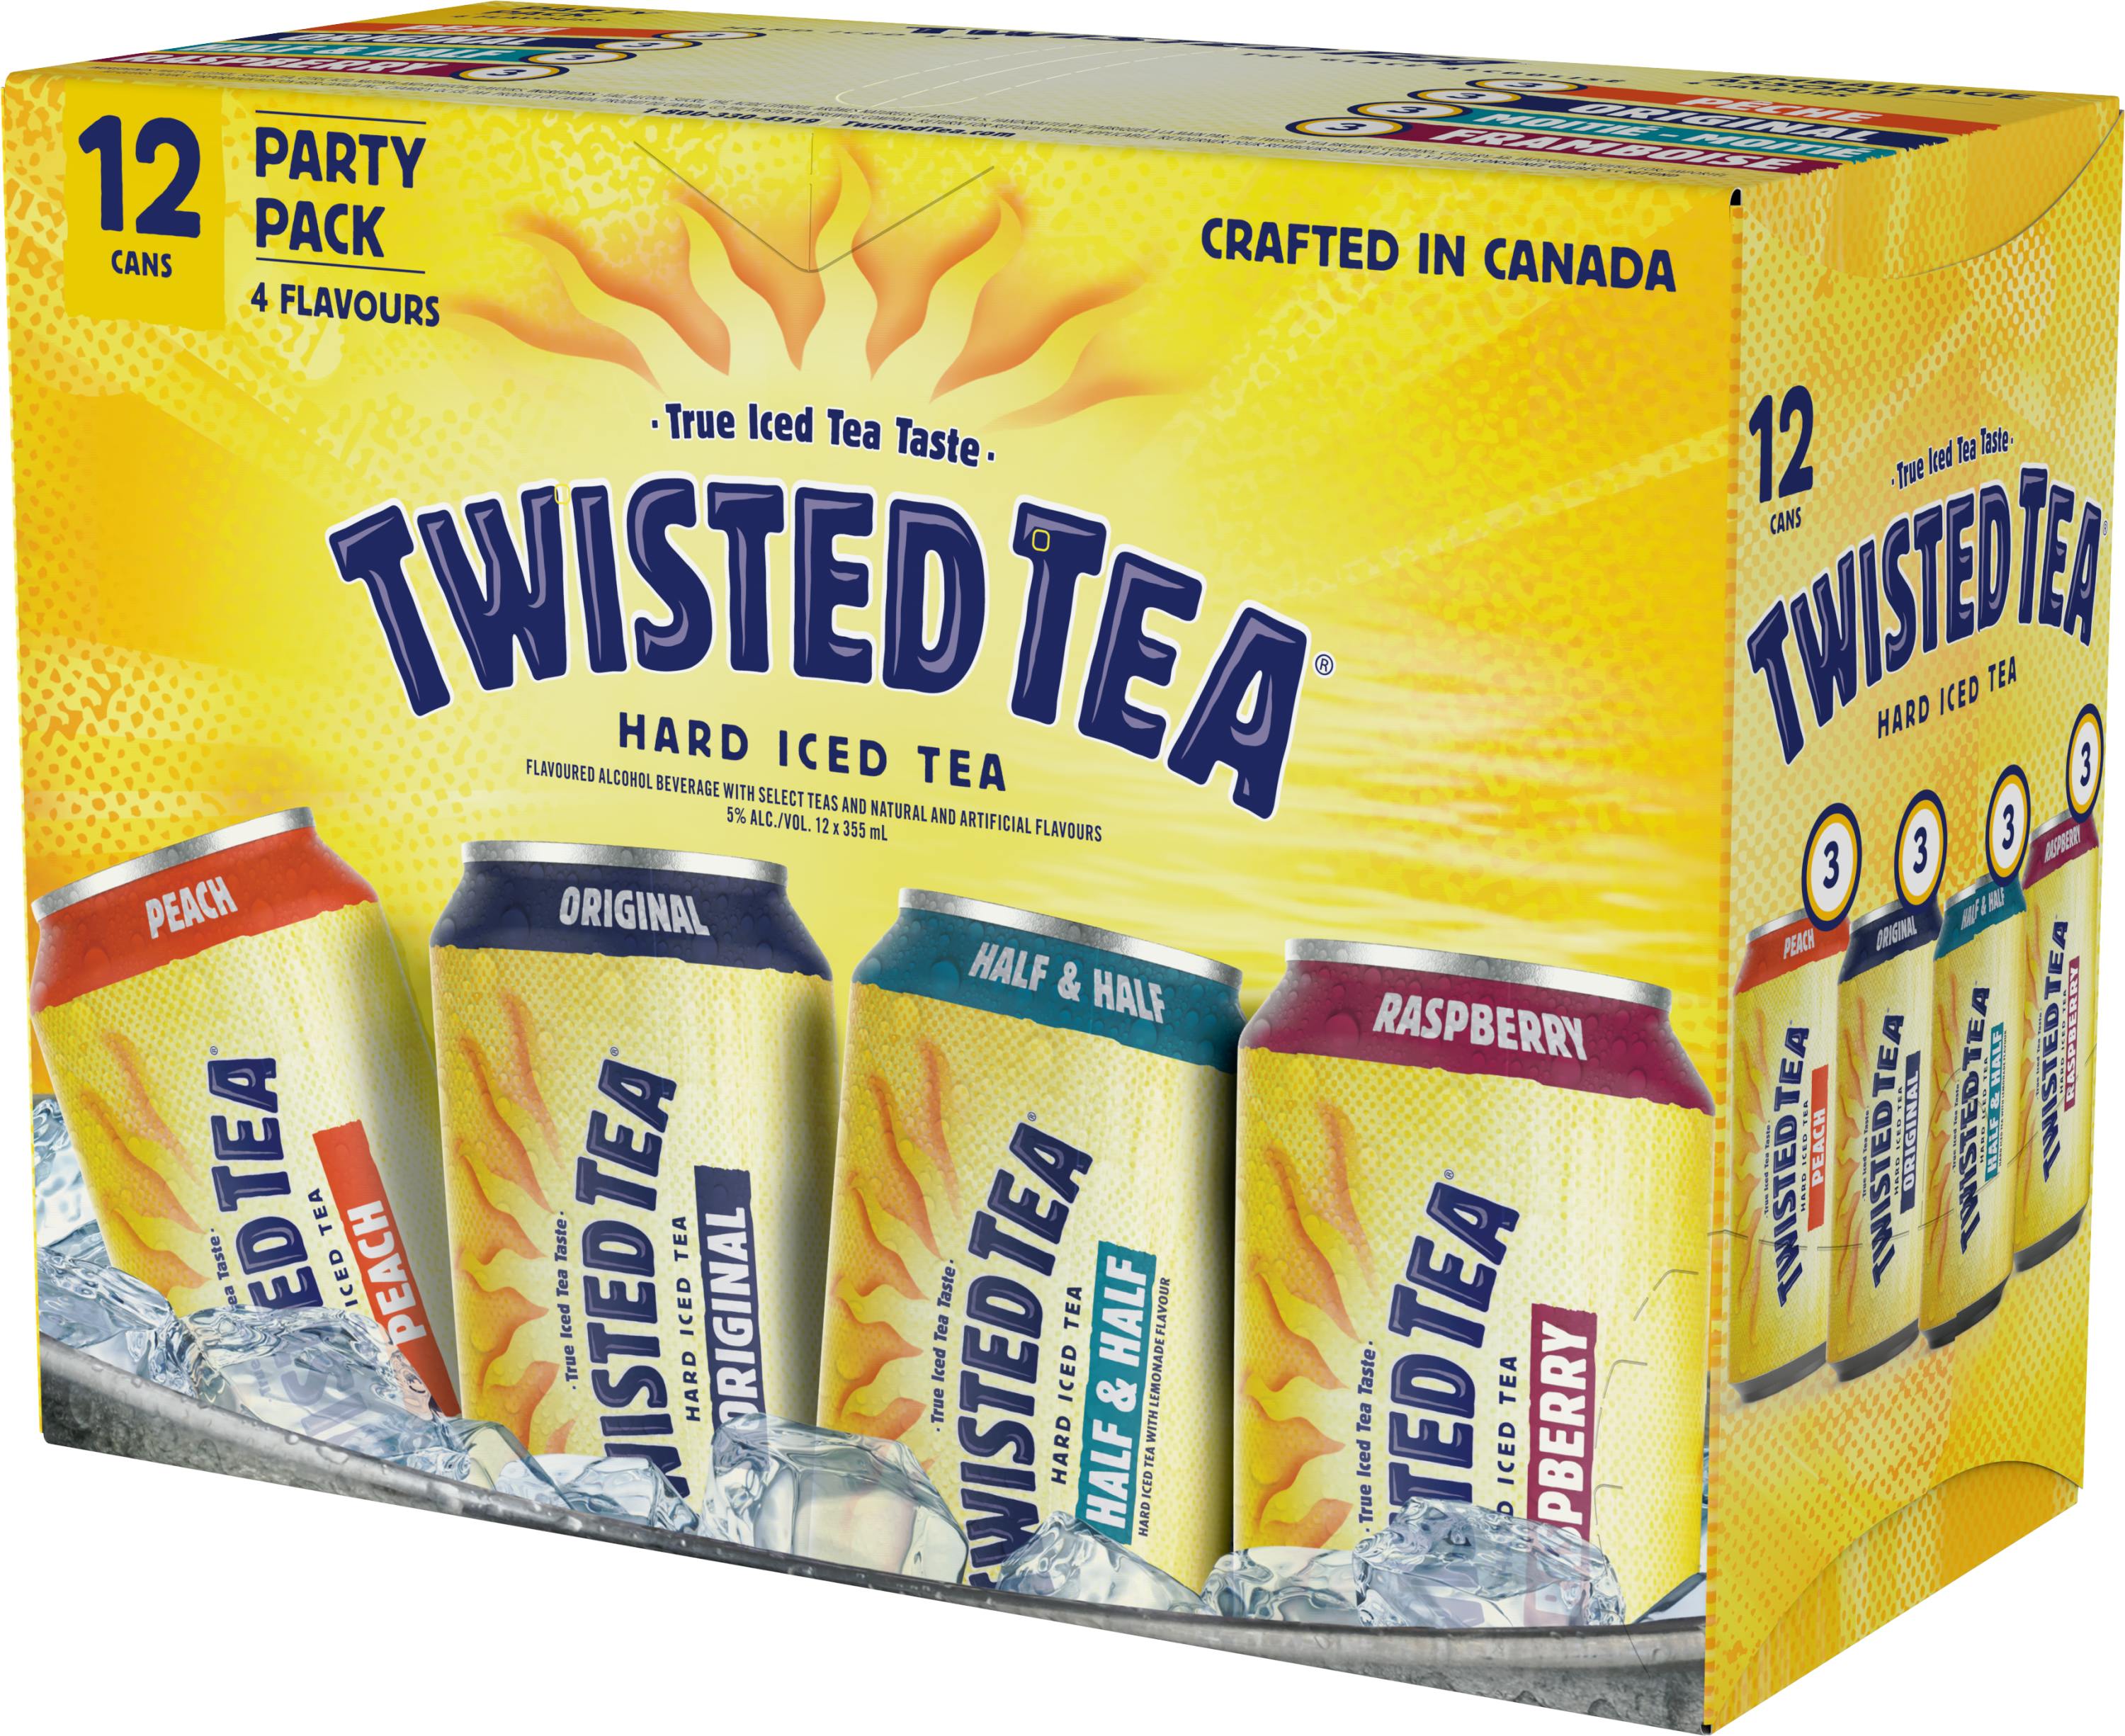 twisted-tea-party-pack-12-pack-12-oz-can-vine-republic